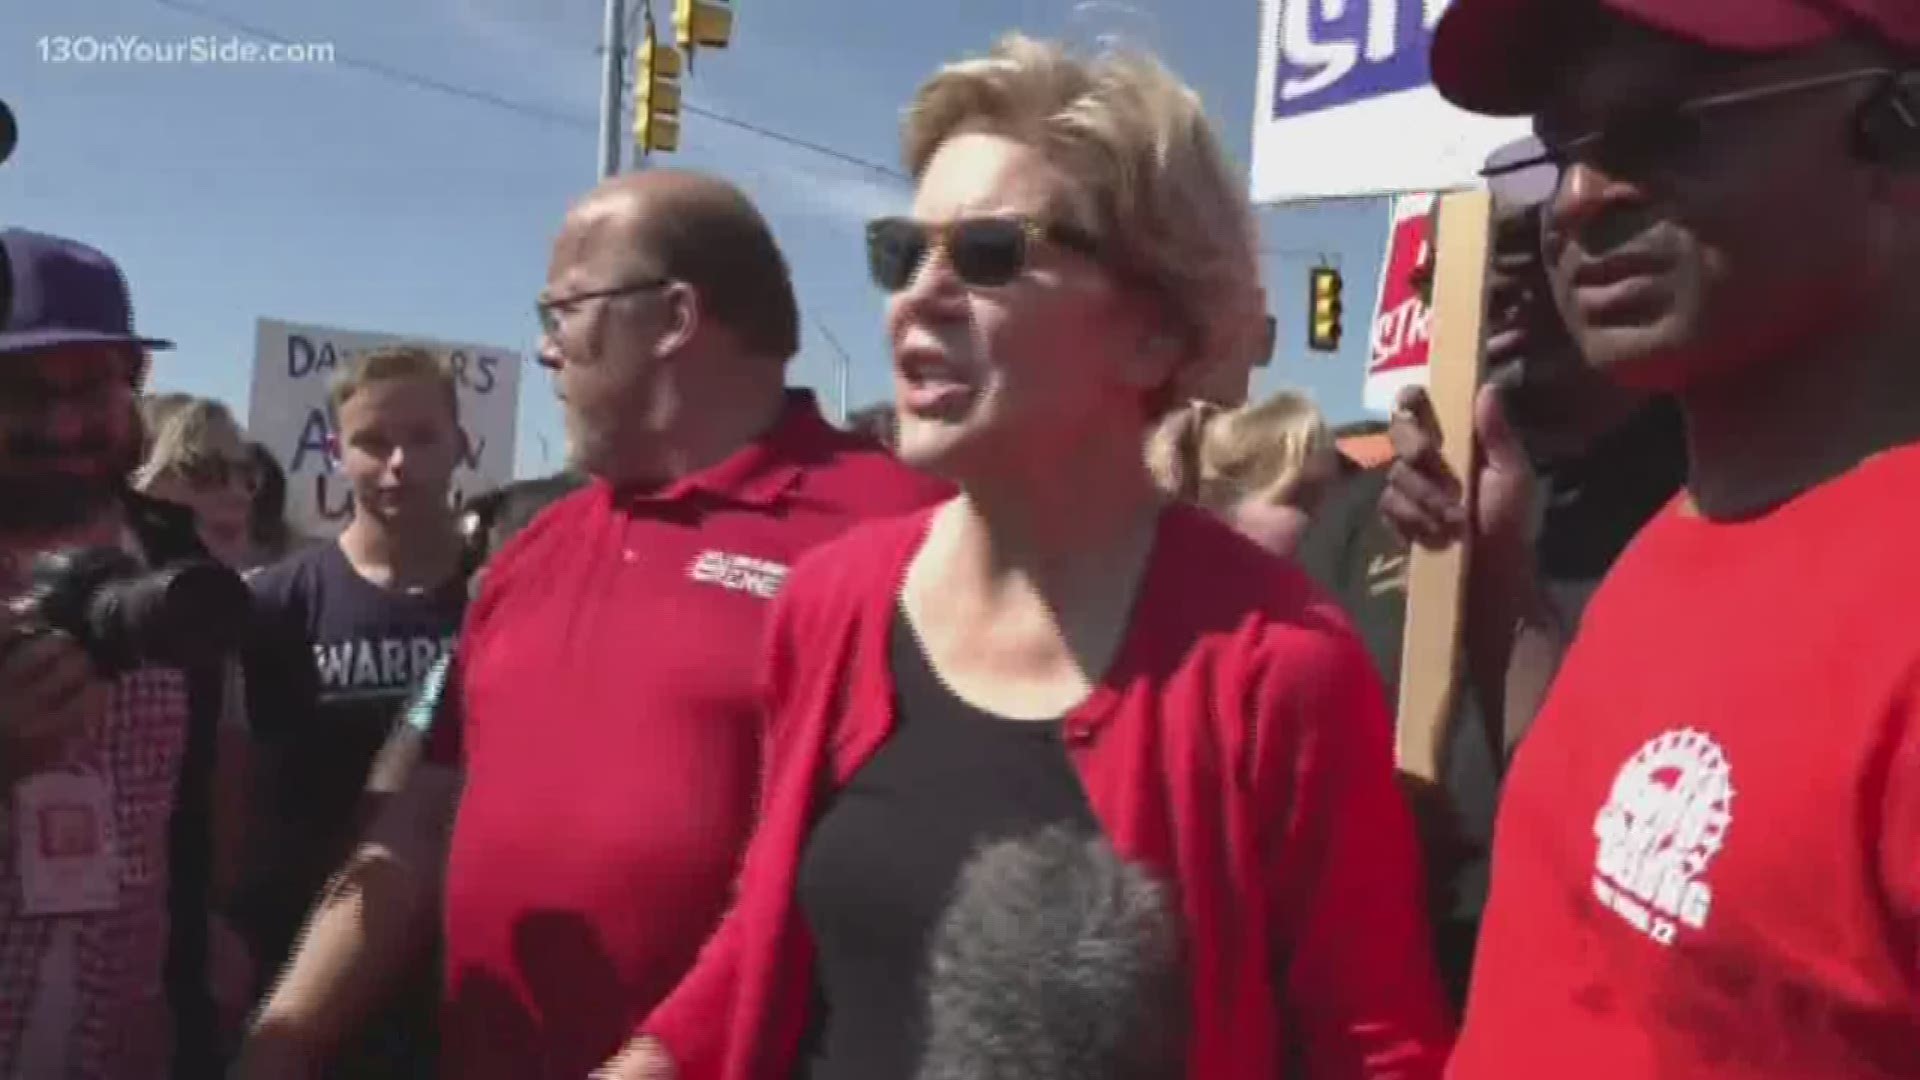 The UAW strike against GM continues into day eight. Presidential candidate Elizabeth Warren visited the striking workers on Sunday at the GM Detroit-Hamtramck plant.